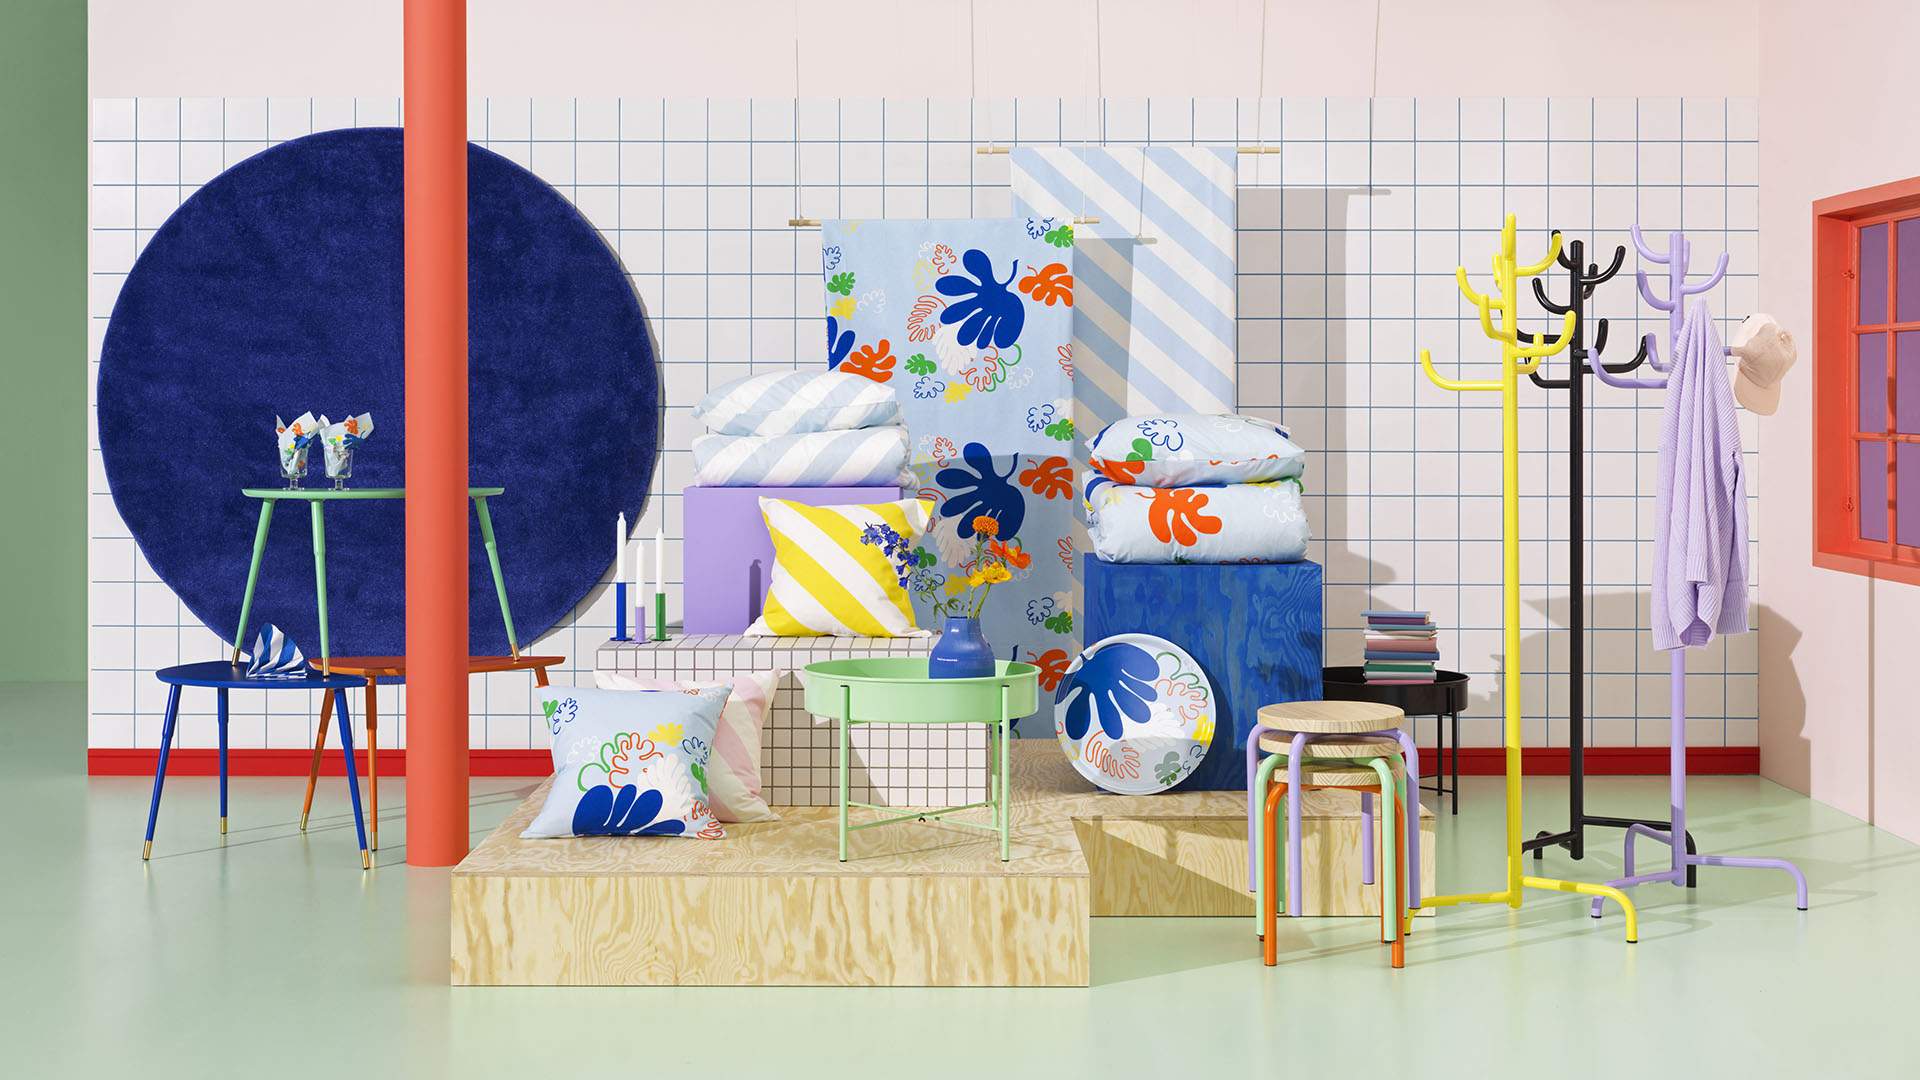 Retro Alert: IKEA's New Collection Reimagines the Swedish Retailer's Top Products From the Past 80 Years